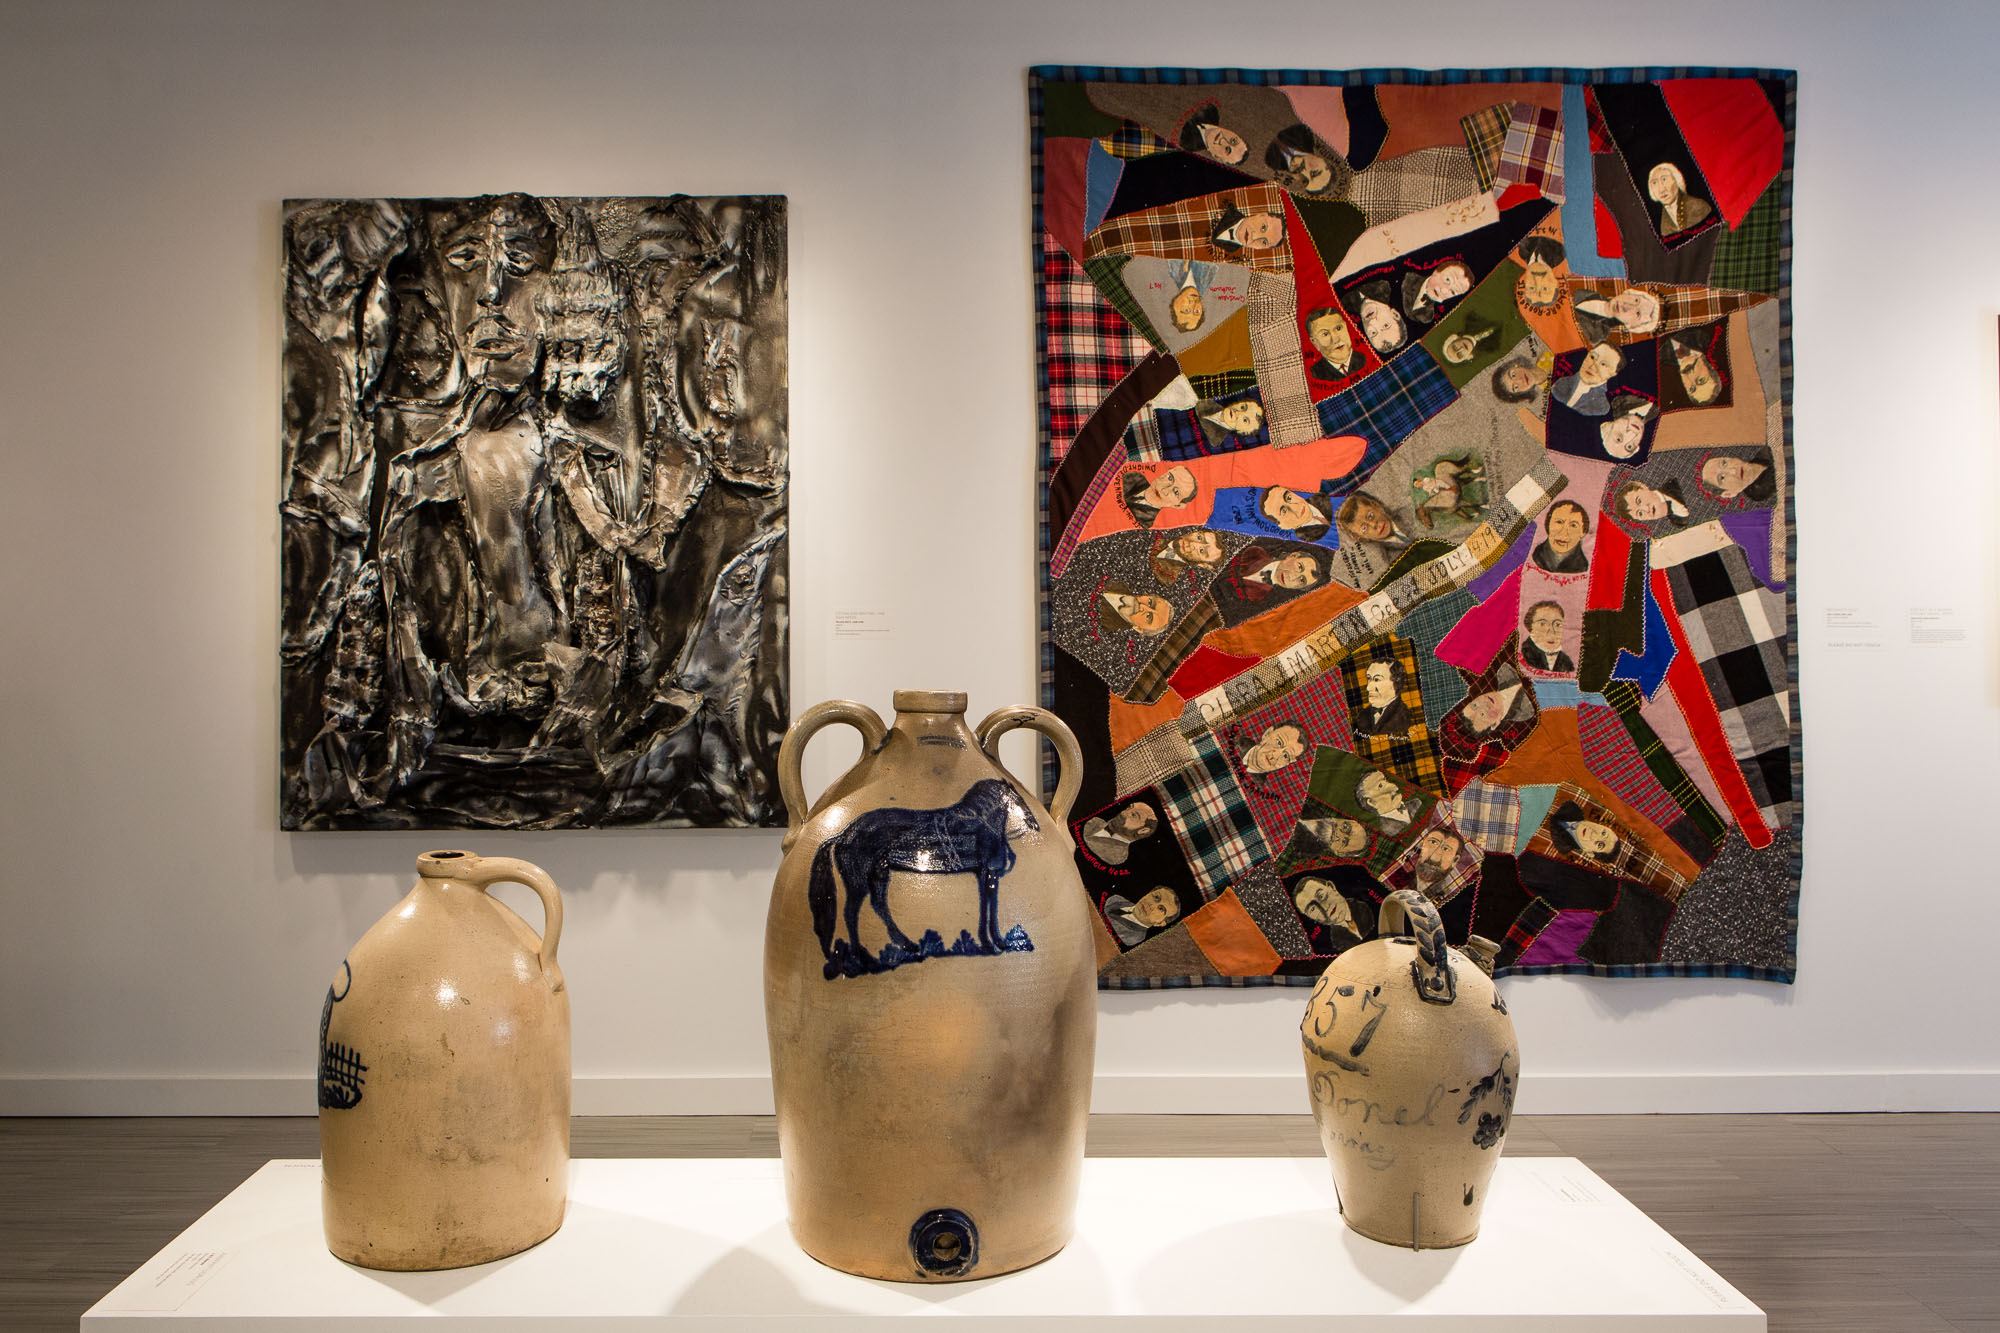 Water jugs and quilts in the American Folk art Museum in New York